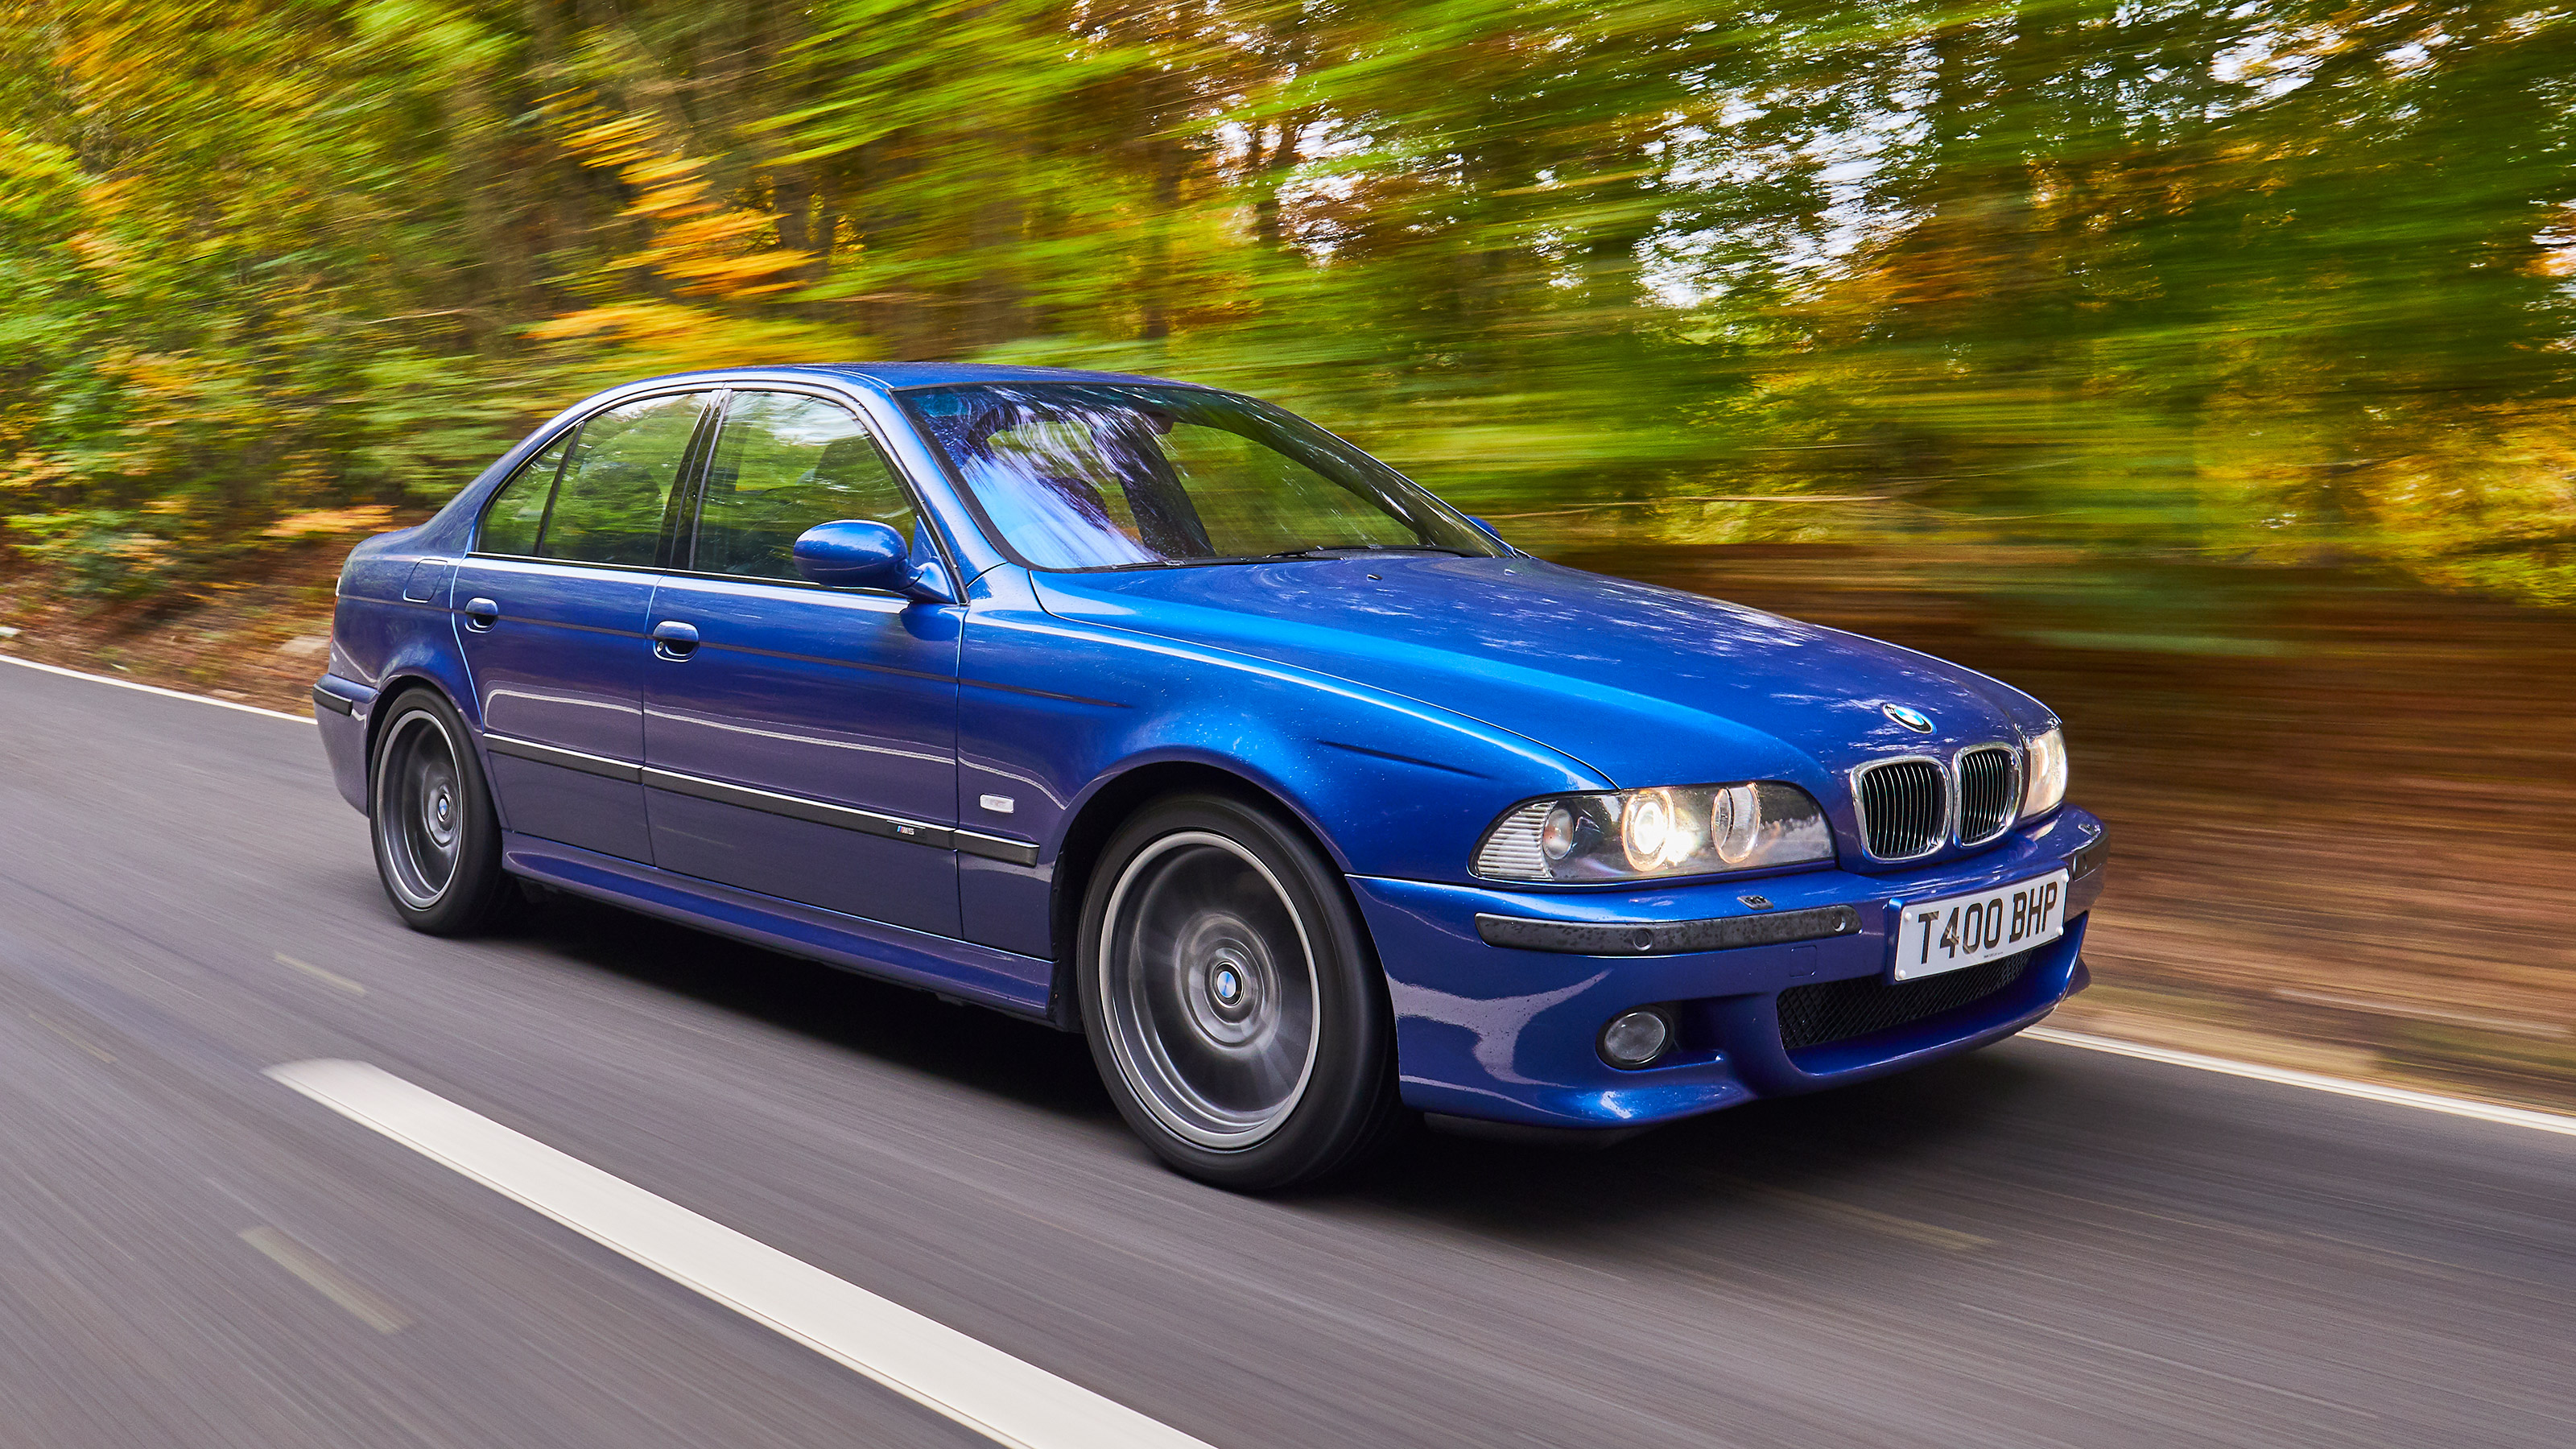 BMW E39 M5: review, history and specs | evo